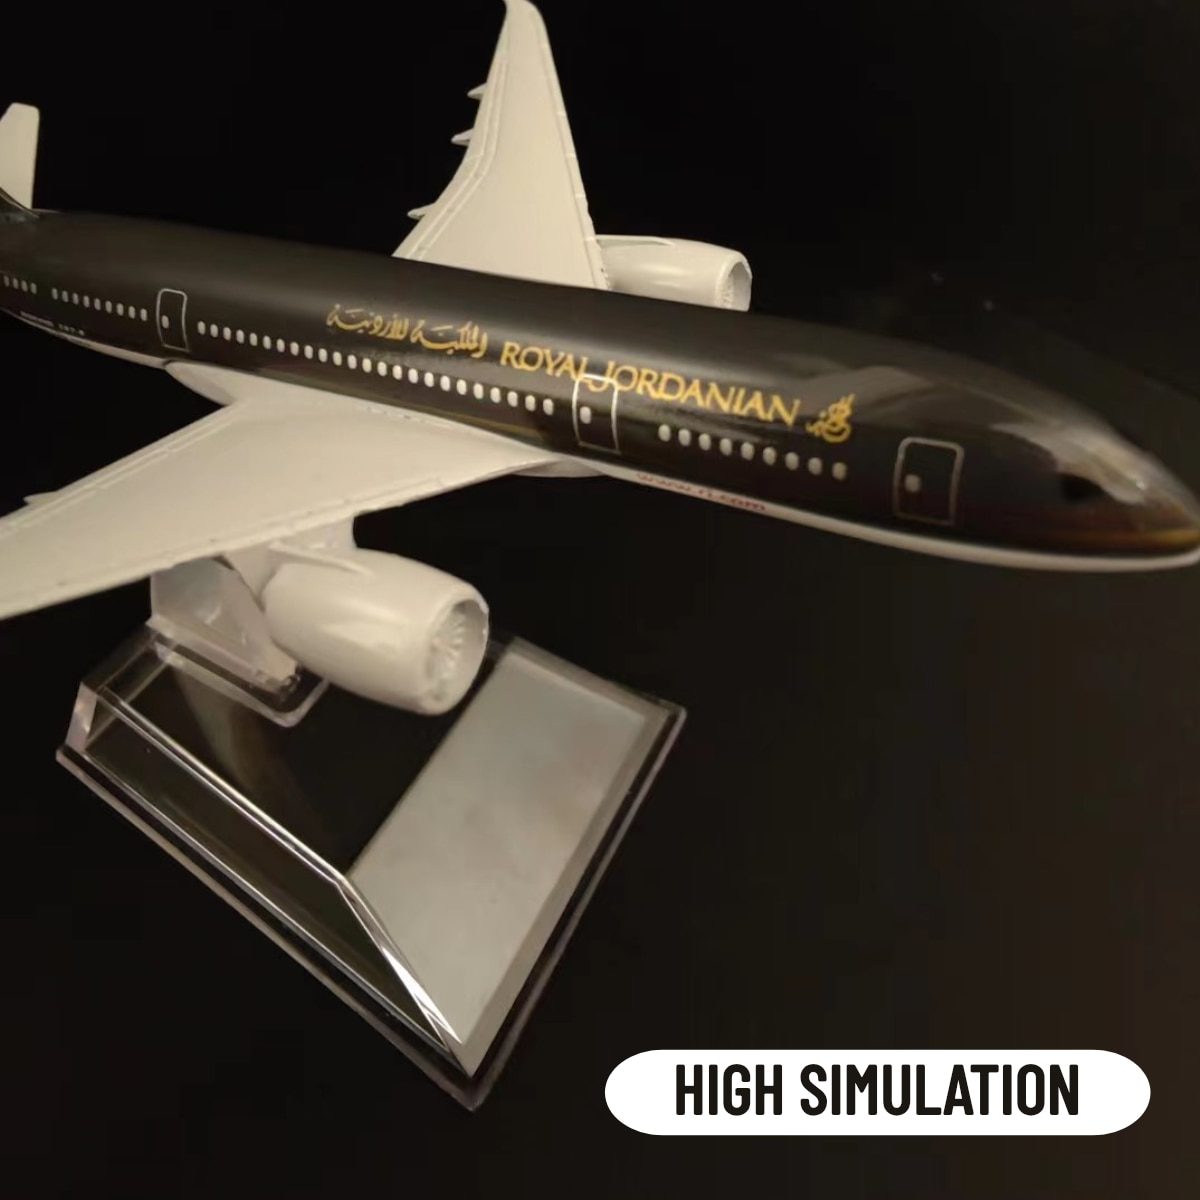 Scale-1-400-Metal-Airplane-Replica-15cm-Jordanian-Africa-Airlines-Aircraft-Model-Aviation-Diecast-Collectible-Miniature-2